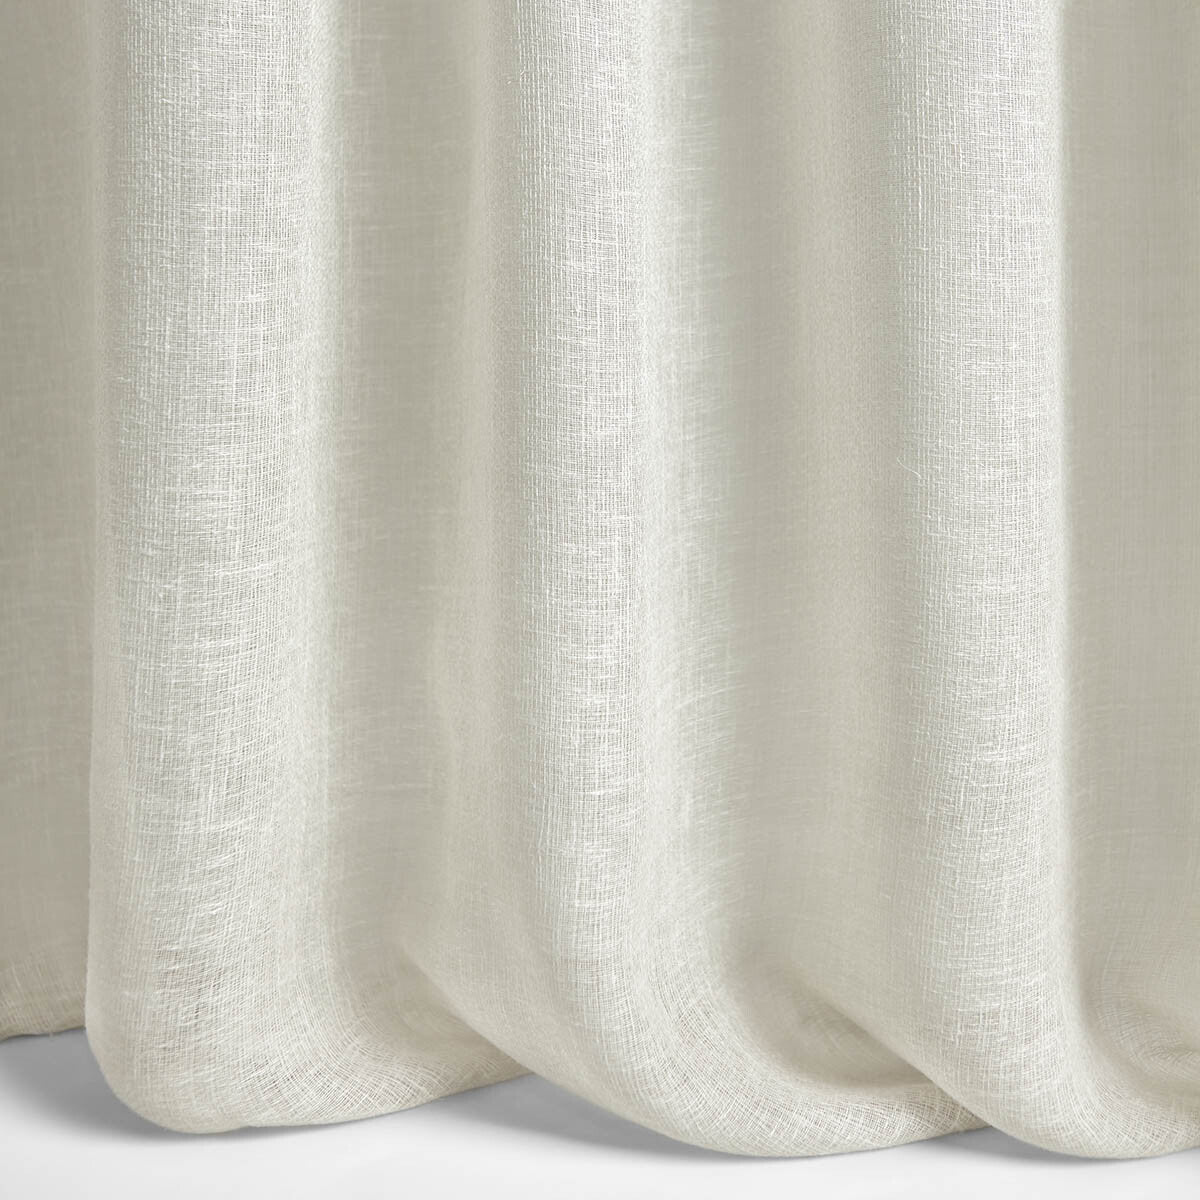 Fugaz fabric in 6 color - pattern LZ-30406.06.0 - by Kravet Couture in the Lizzo collection